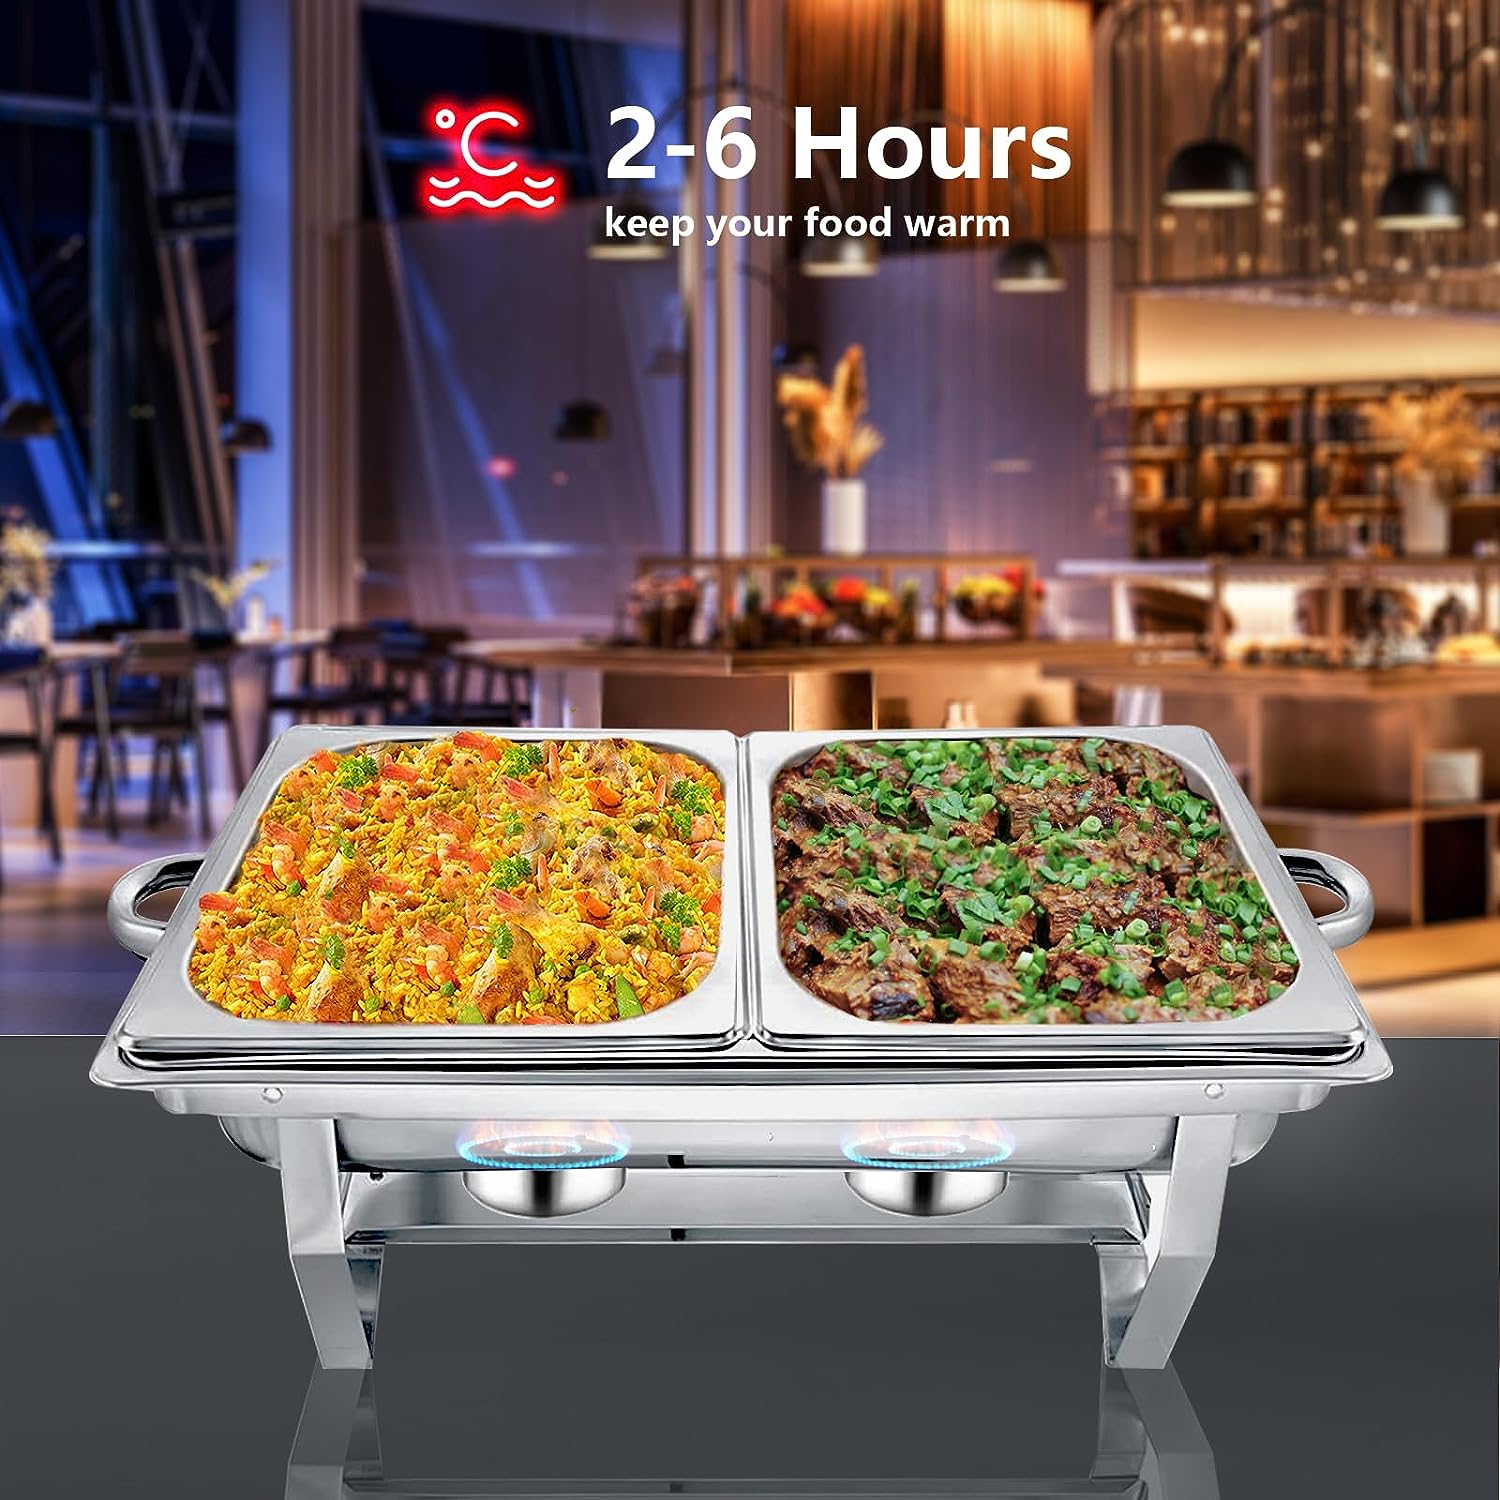 Chafing Dishes: The Best Way to Keep Buffet Food Hot